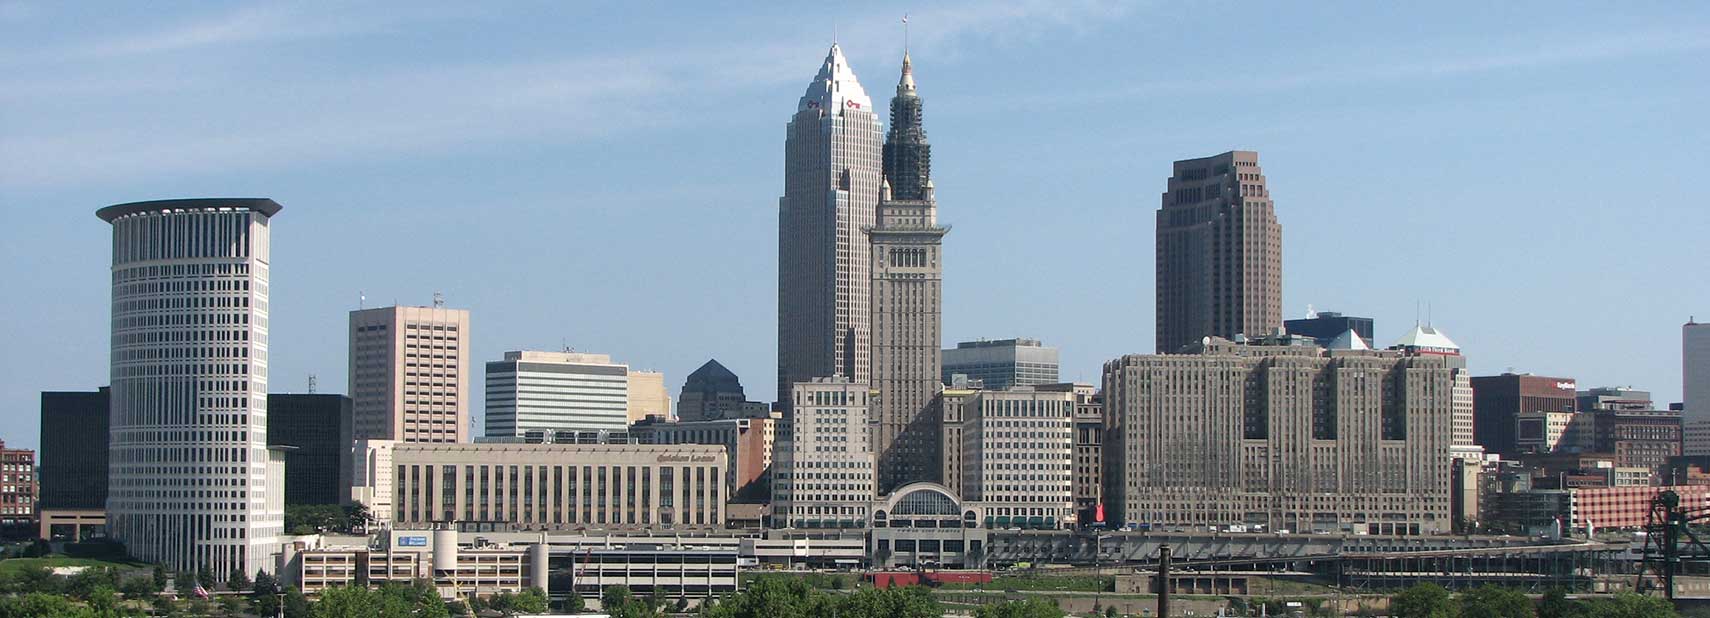 Google Map of Cleveland, Ohio, USA - Nations Online Project